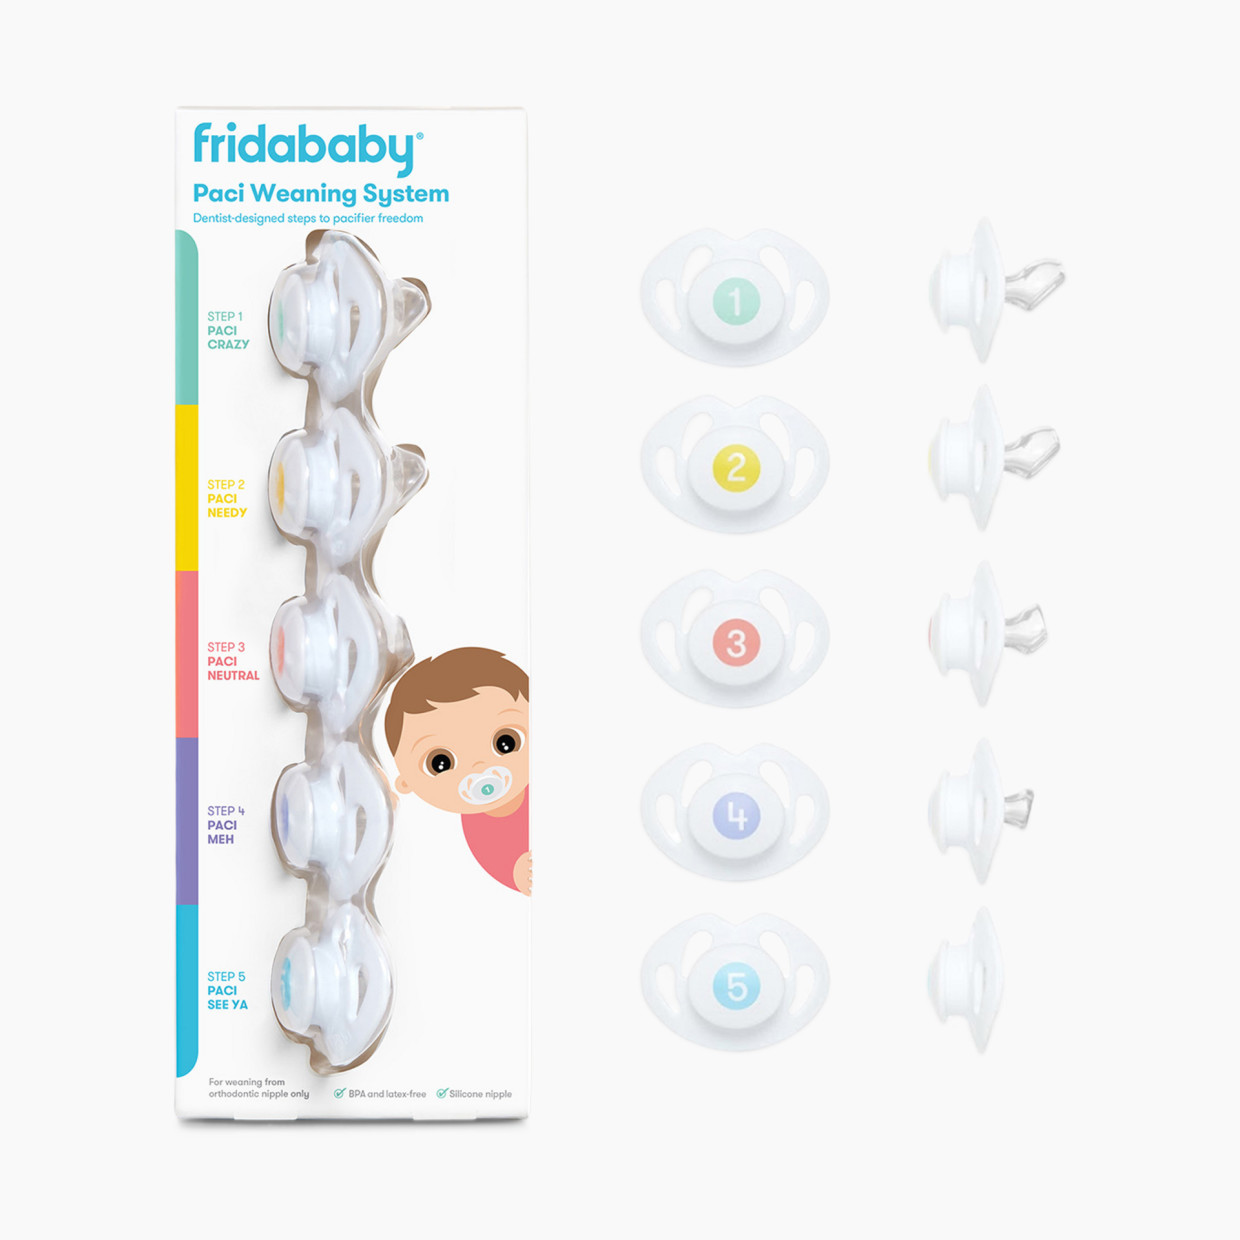 FridaBaby Paci Weaning System.